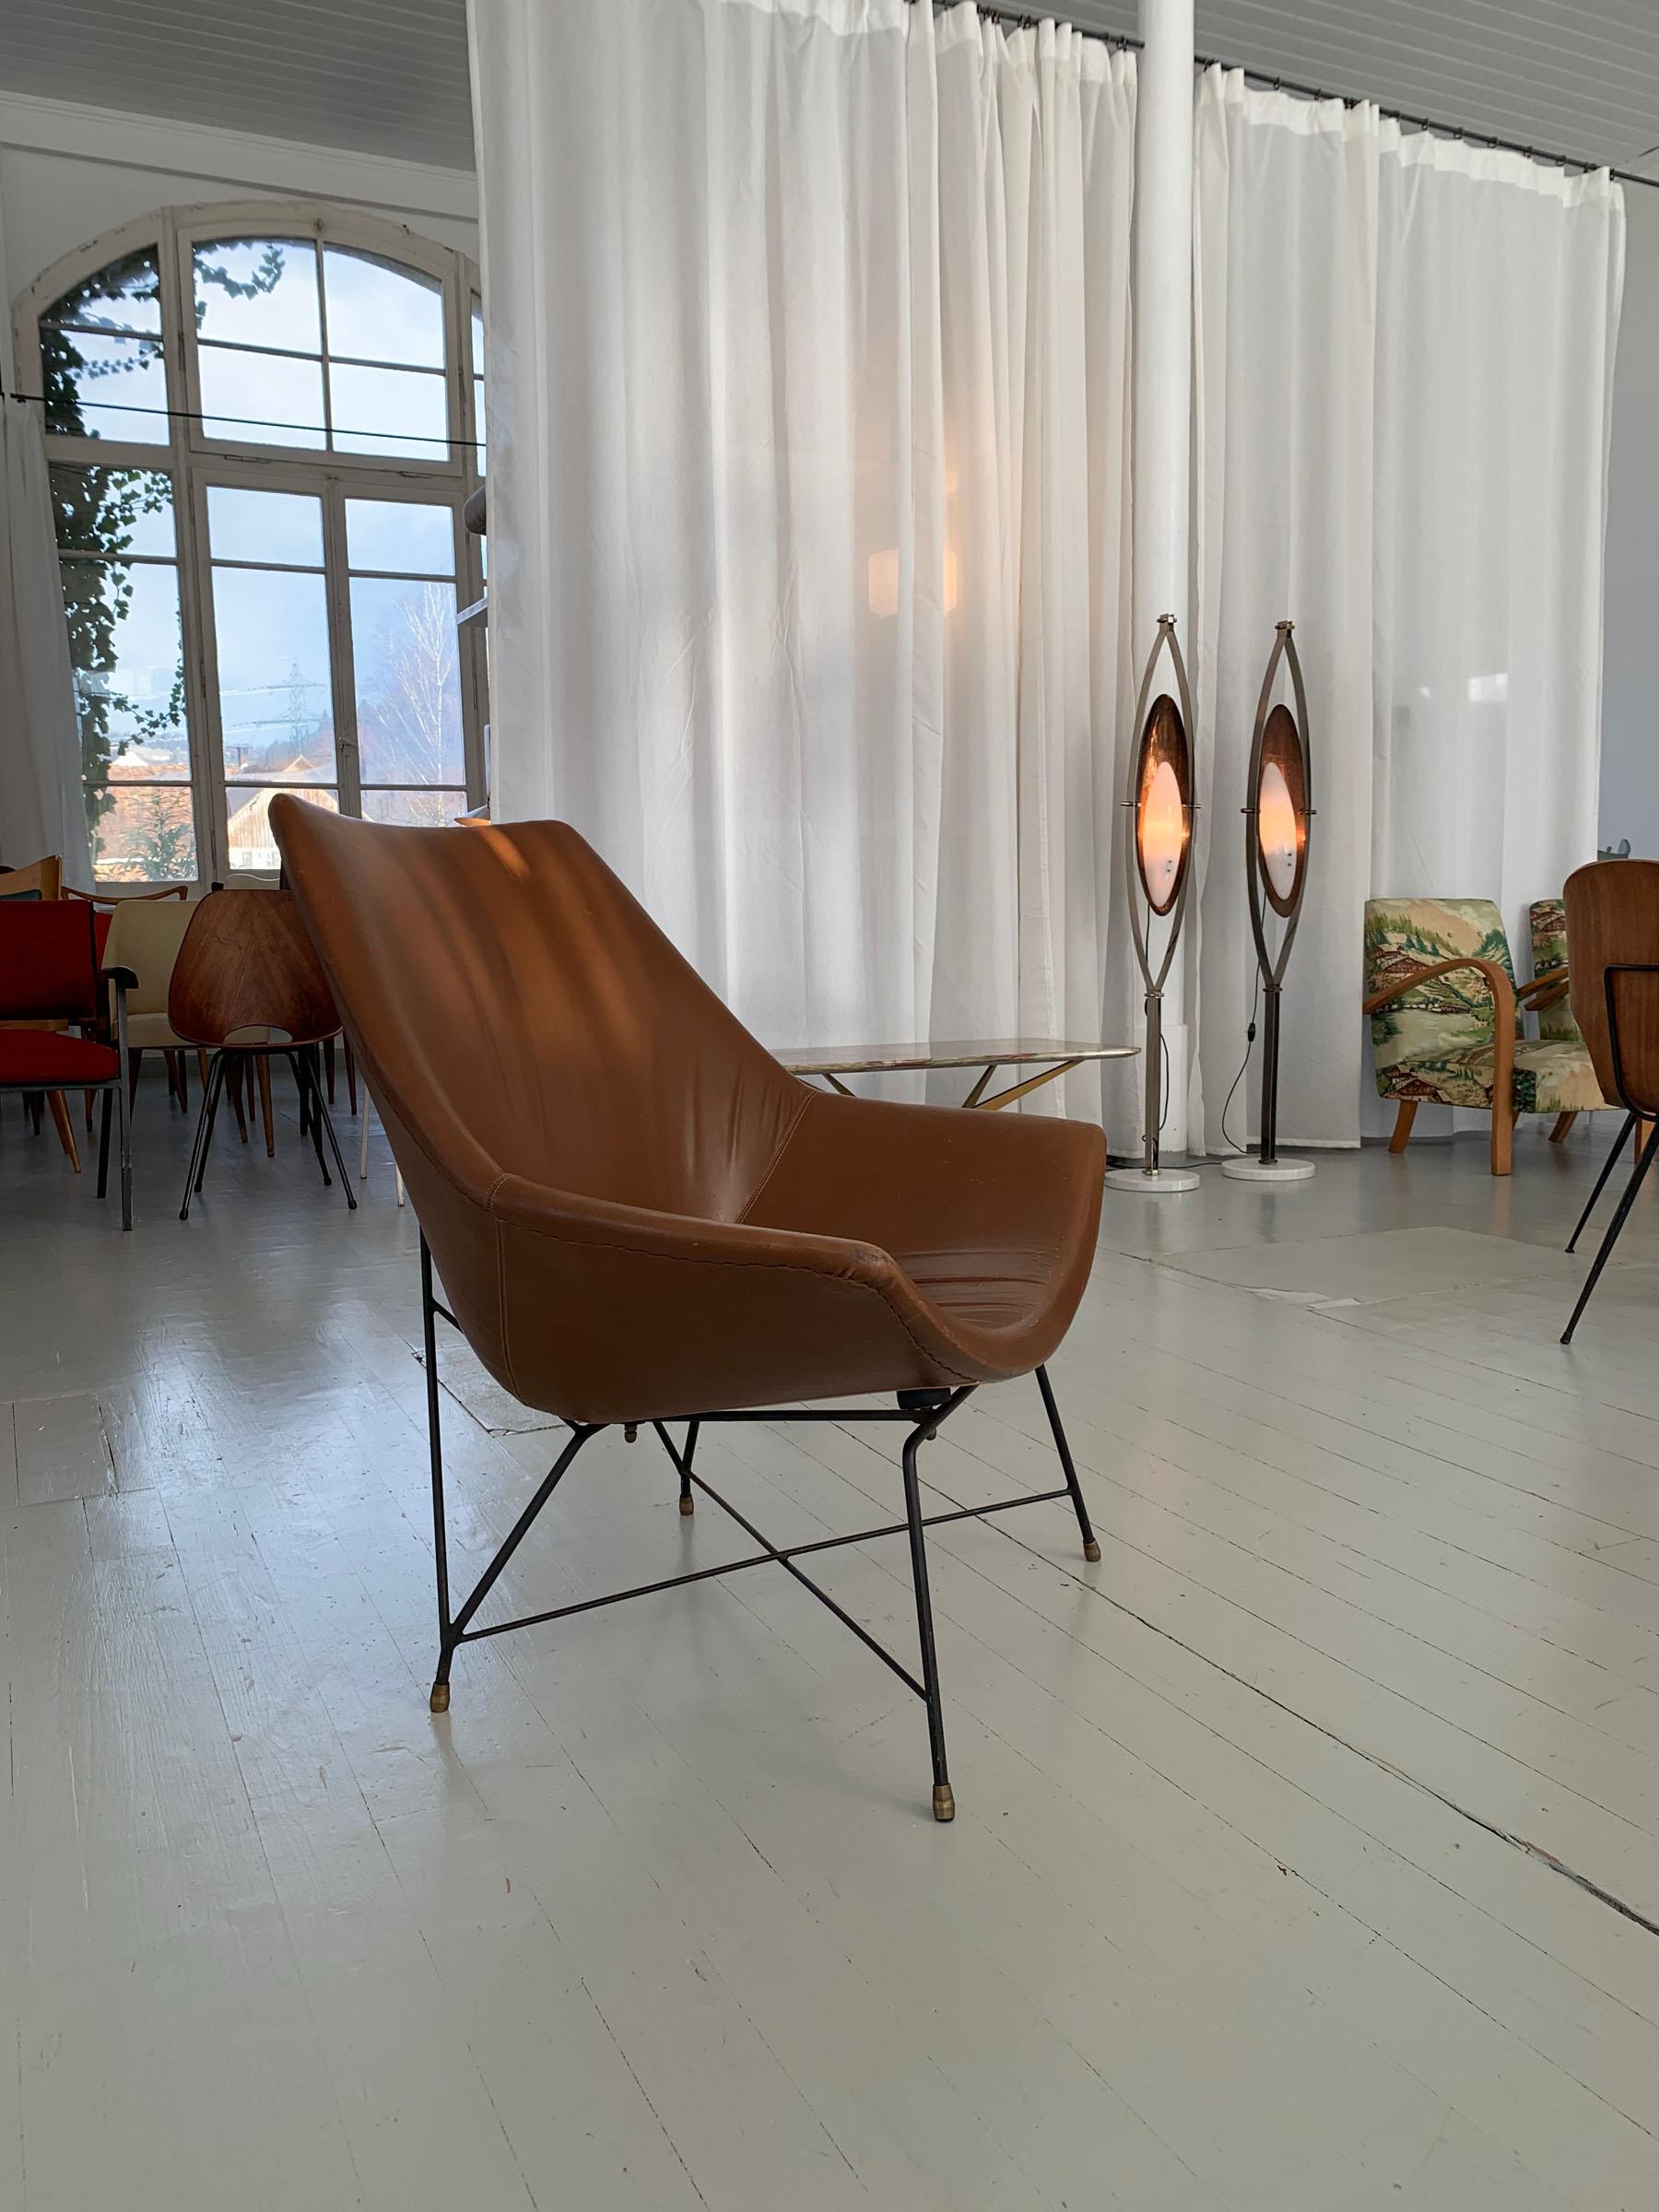 Italian Brown Leather Kosmos Chair Design by Augusto Bozzi for Saporiti, 1954 For Sale 6